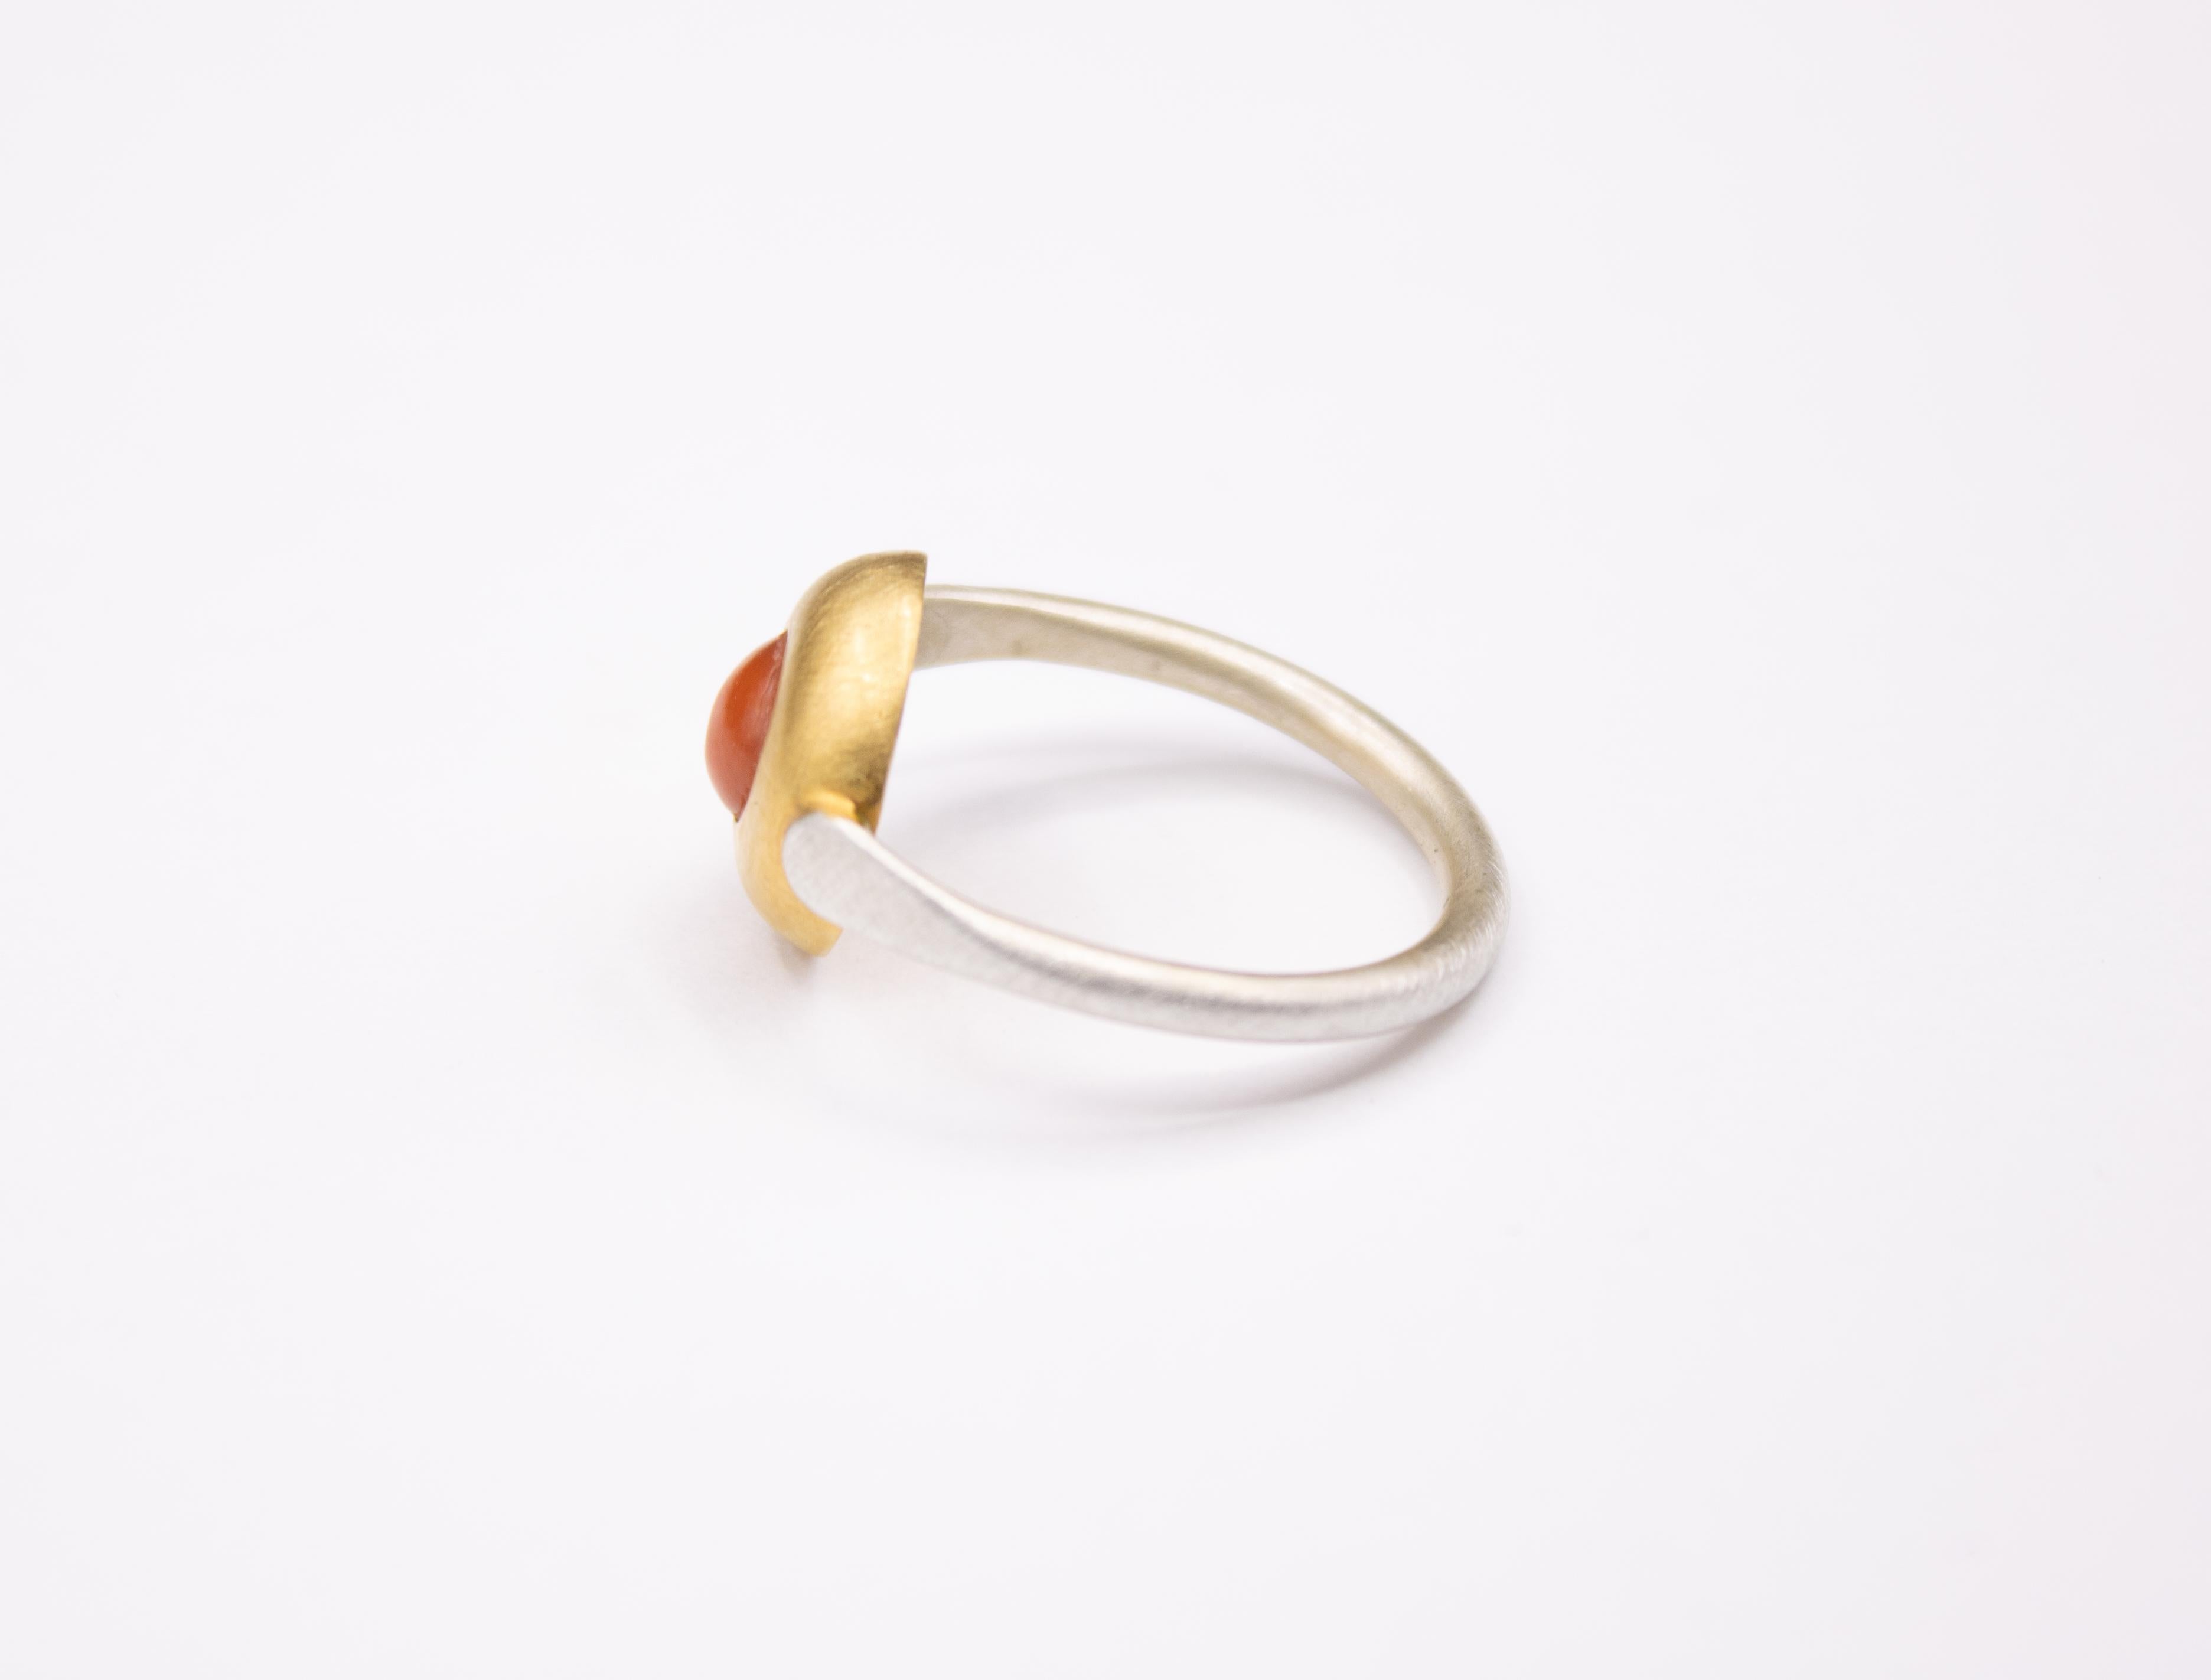 For Sale:  Monika Herré red Coral Ring Slim Sterling silver galvanic gold plating  3